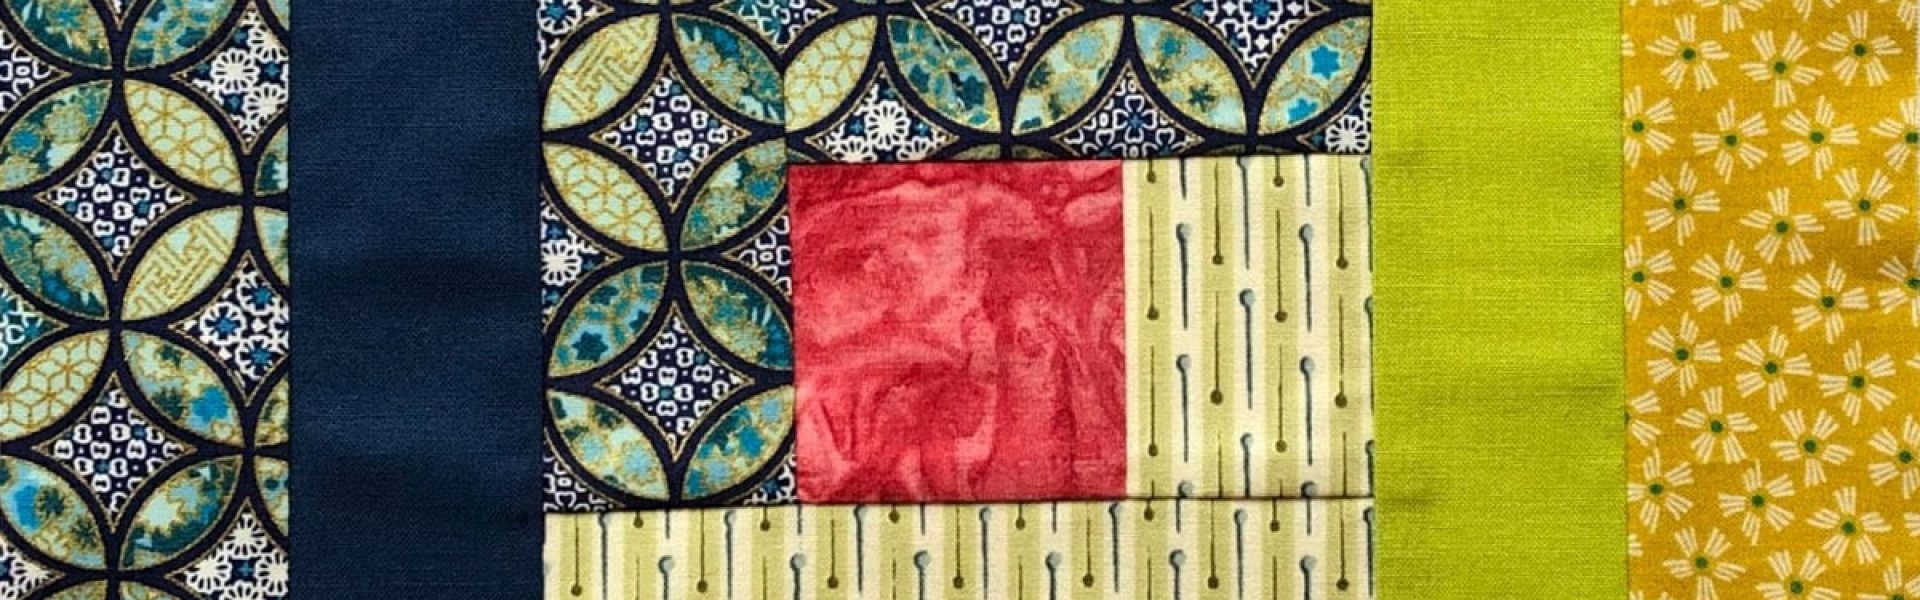 A Graduate Story by Karen Webber, Patchwork and Quilting Graduate